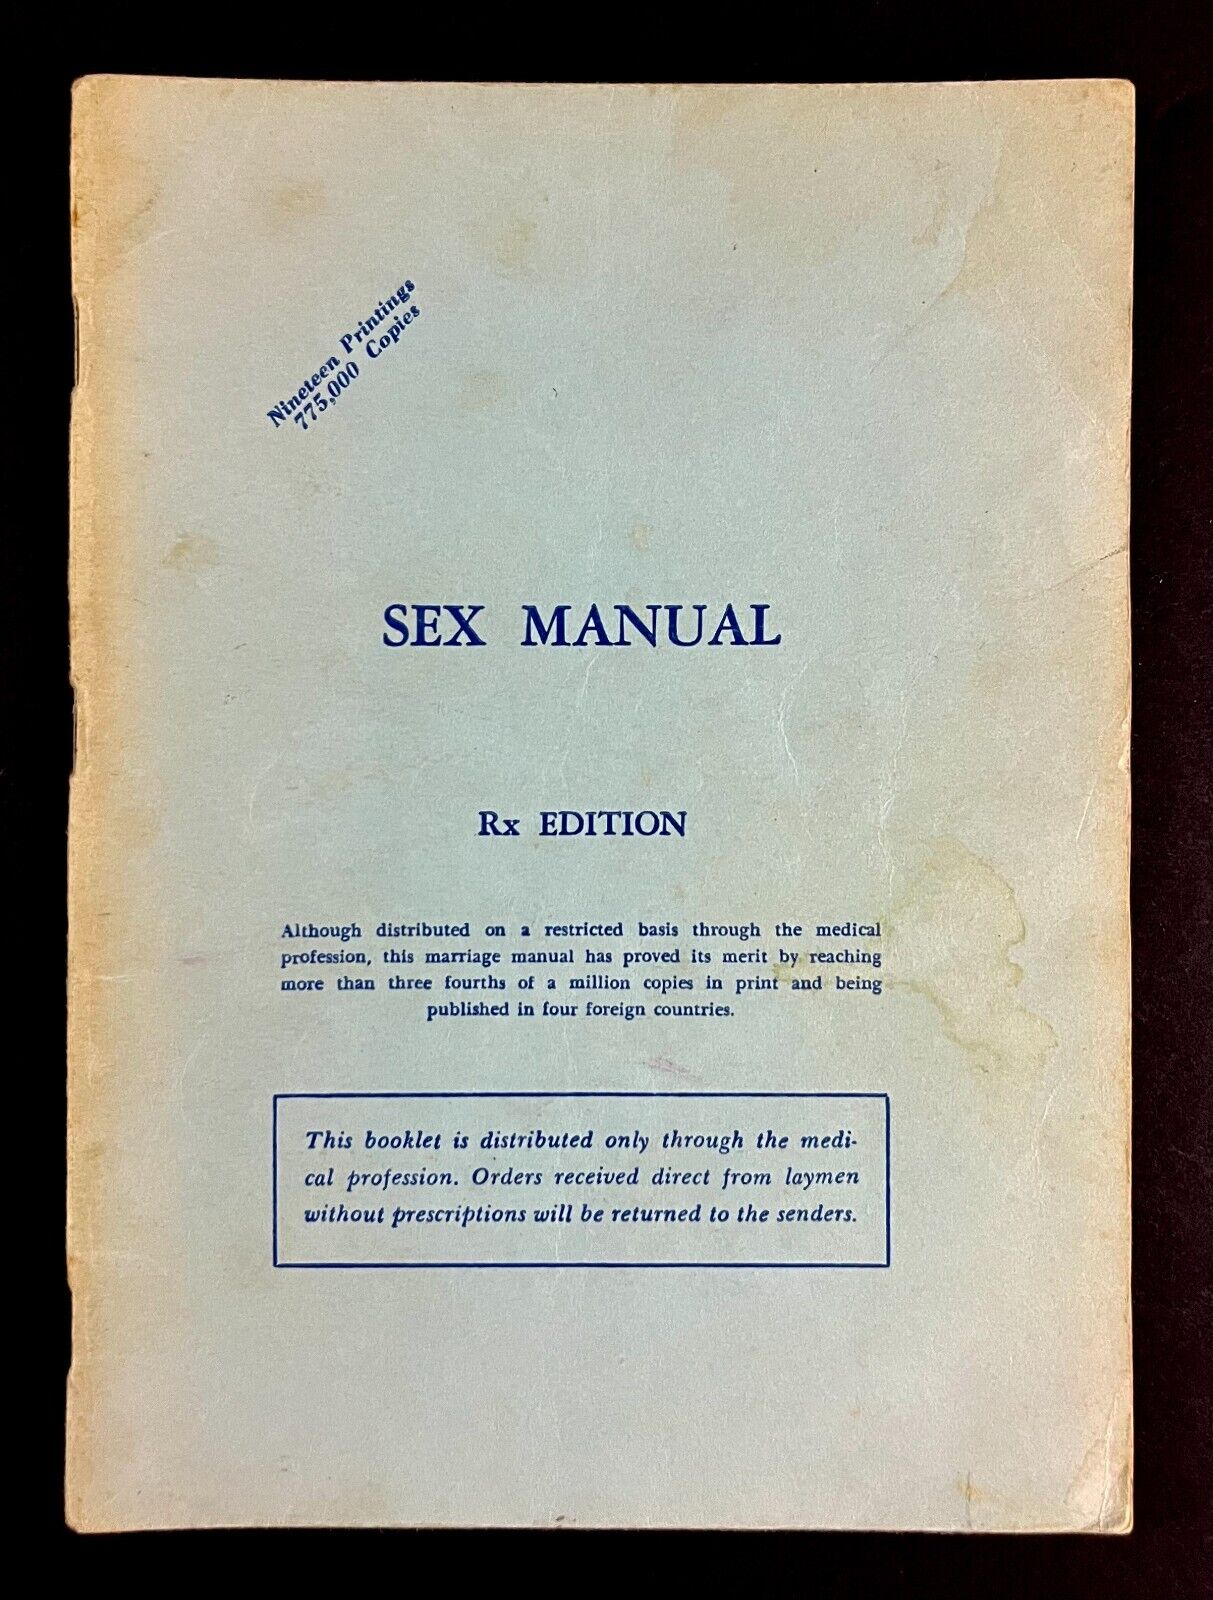 1957 Sex Manual G Lombard Kelly Sexual Science Reproduction Vintage RX Edition